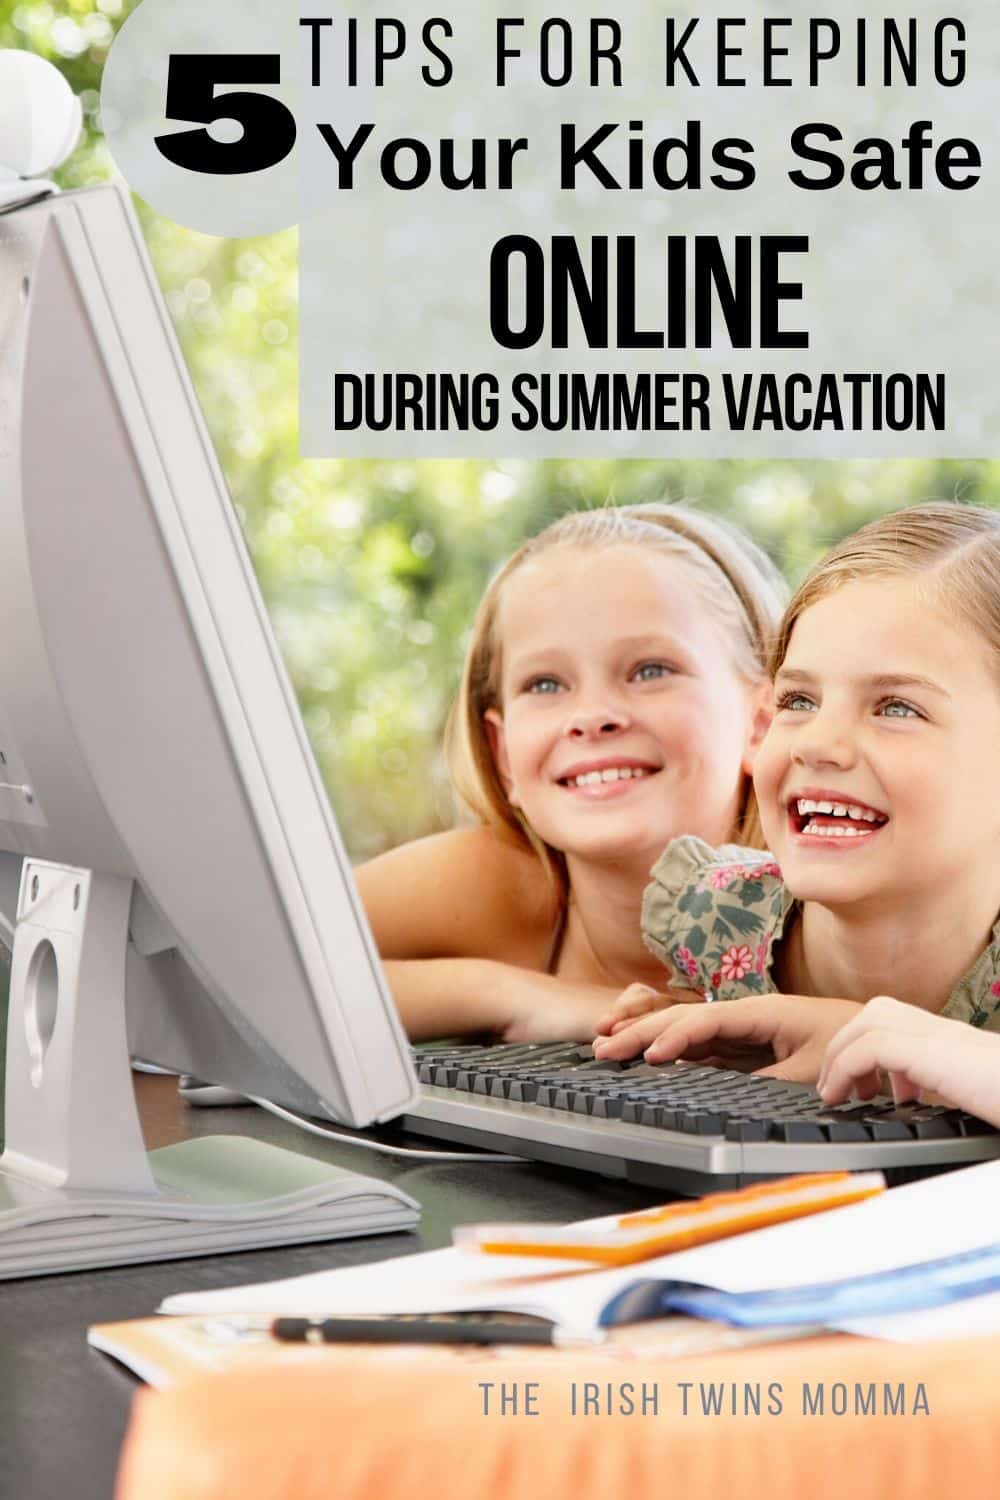 Keeping Your Kids Safe Online During Summer Vacation